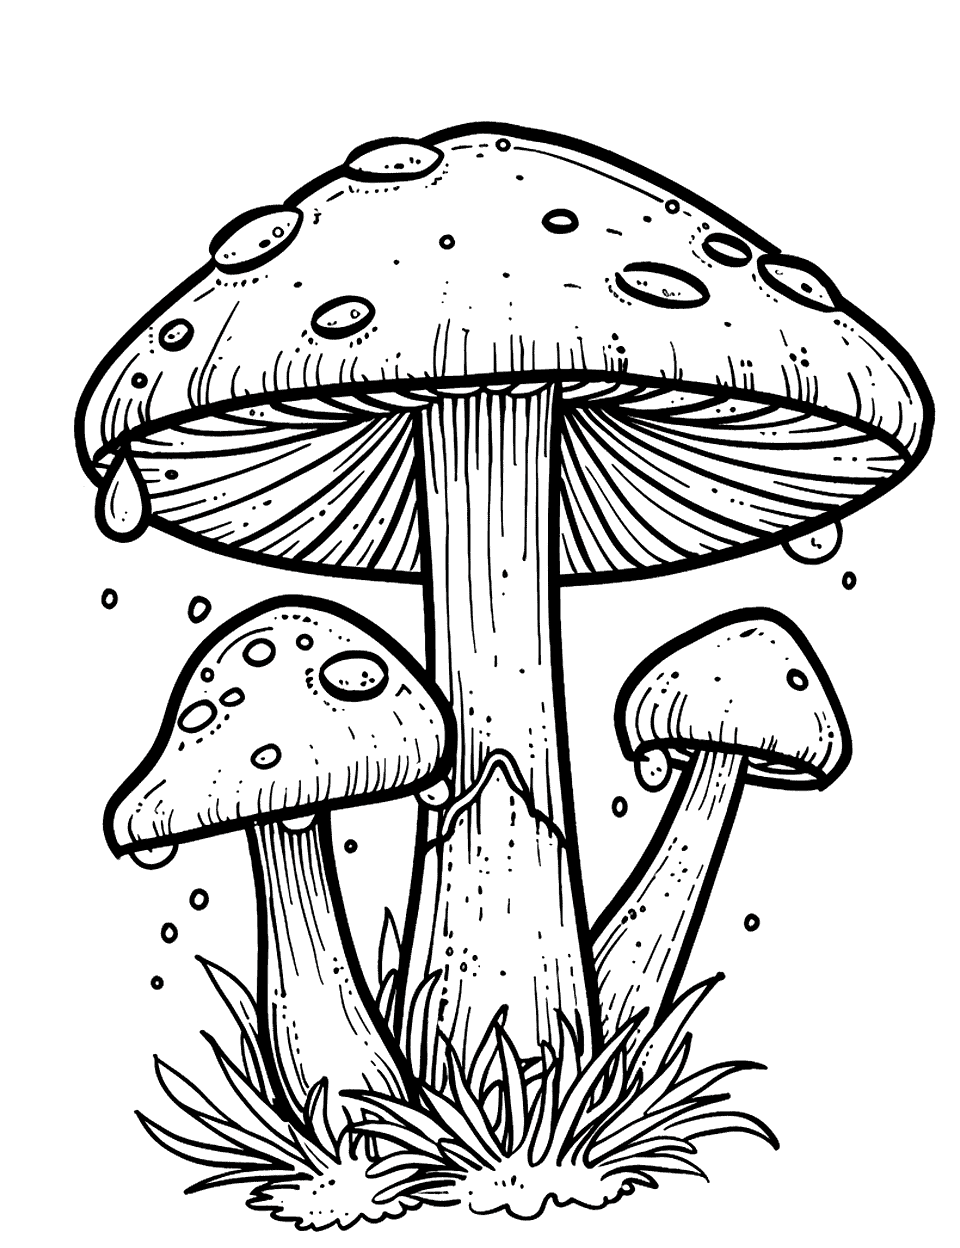 Mushroom and Water Droplets Coloring Page - Water droplets hang delicately from the edges of mushroom caps.